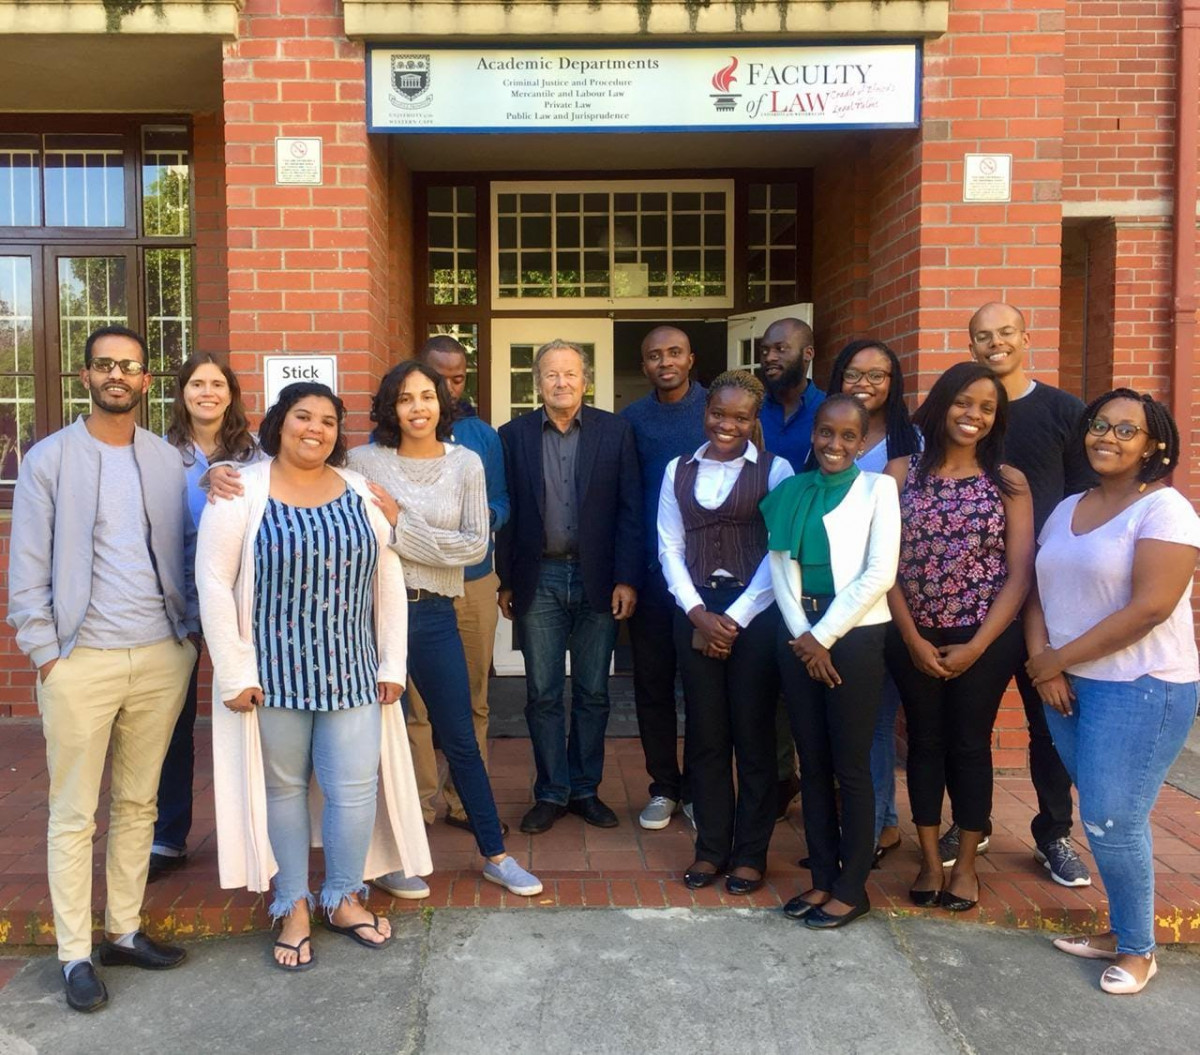 Students at Cape Town university with Mark Pieth